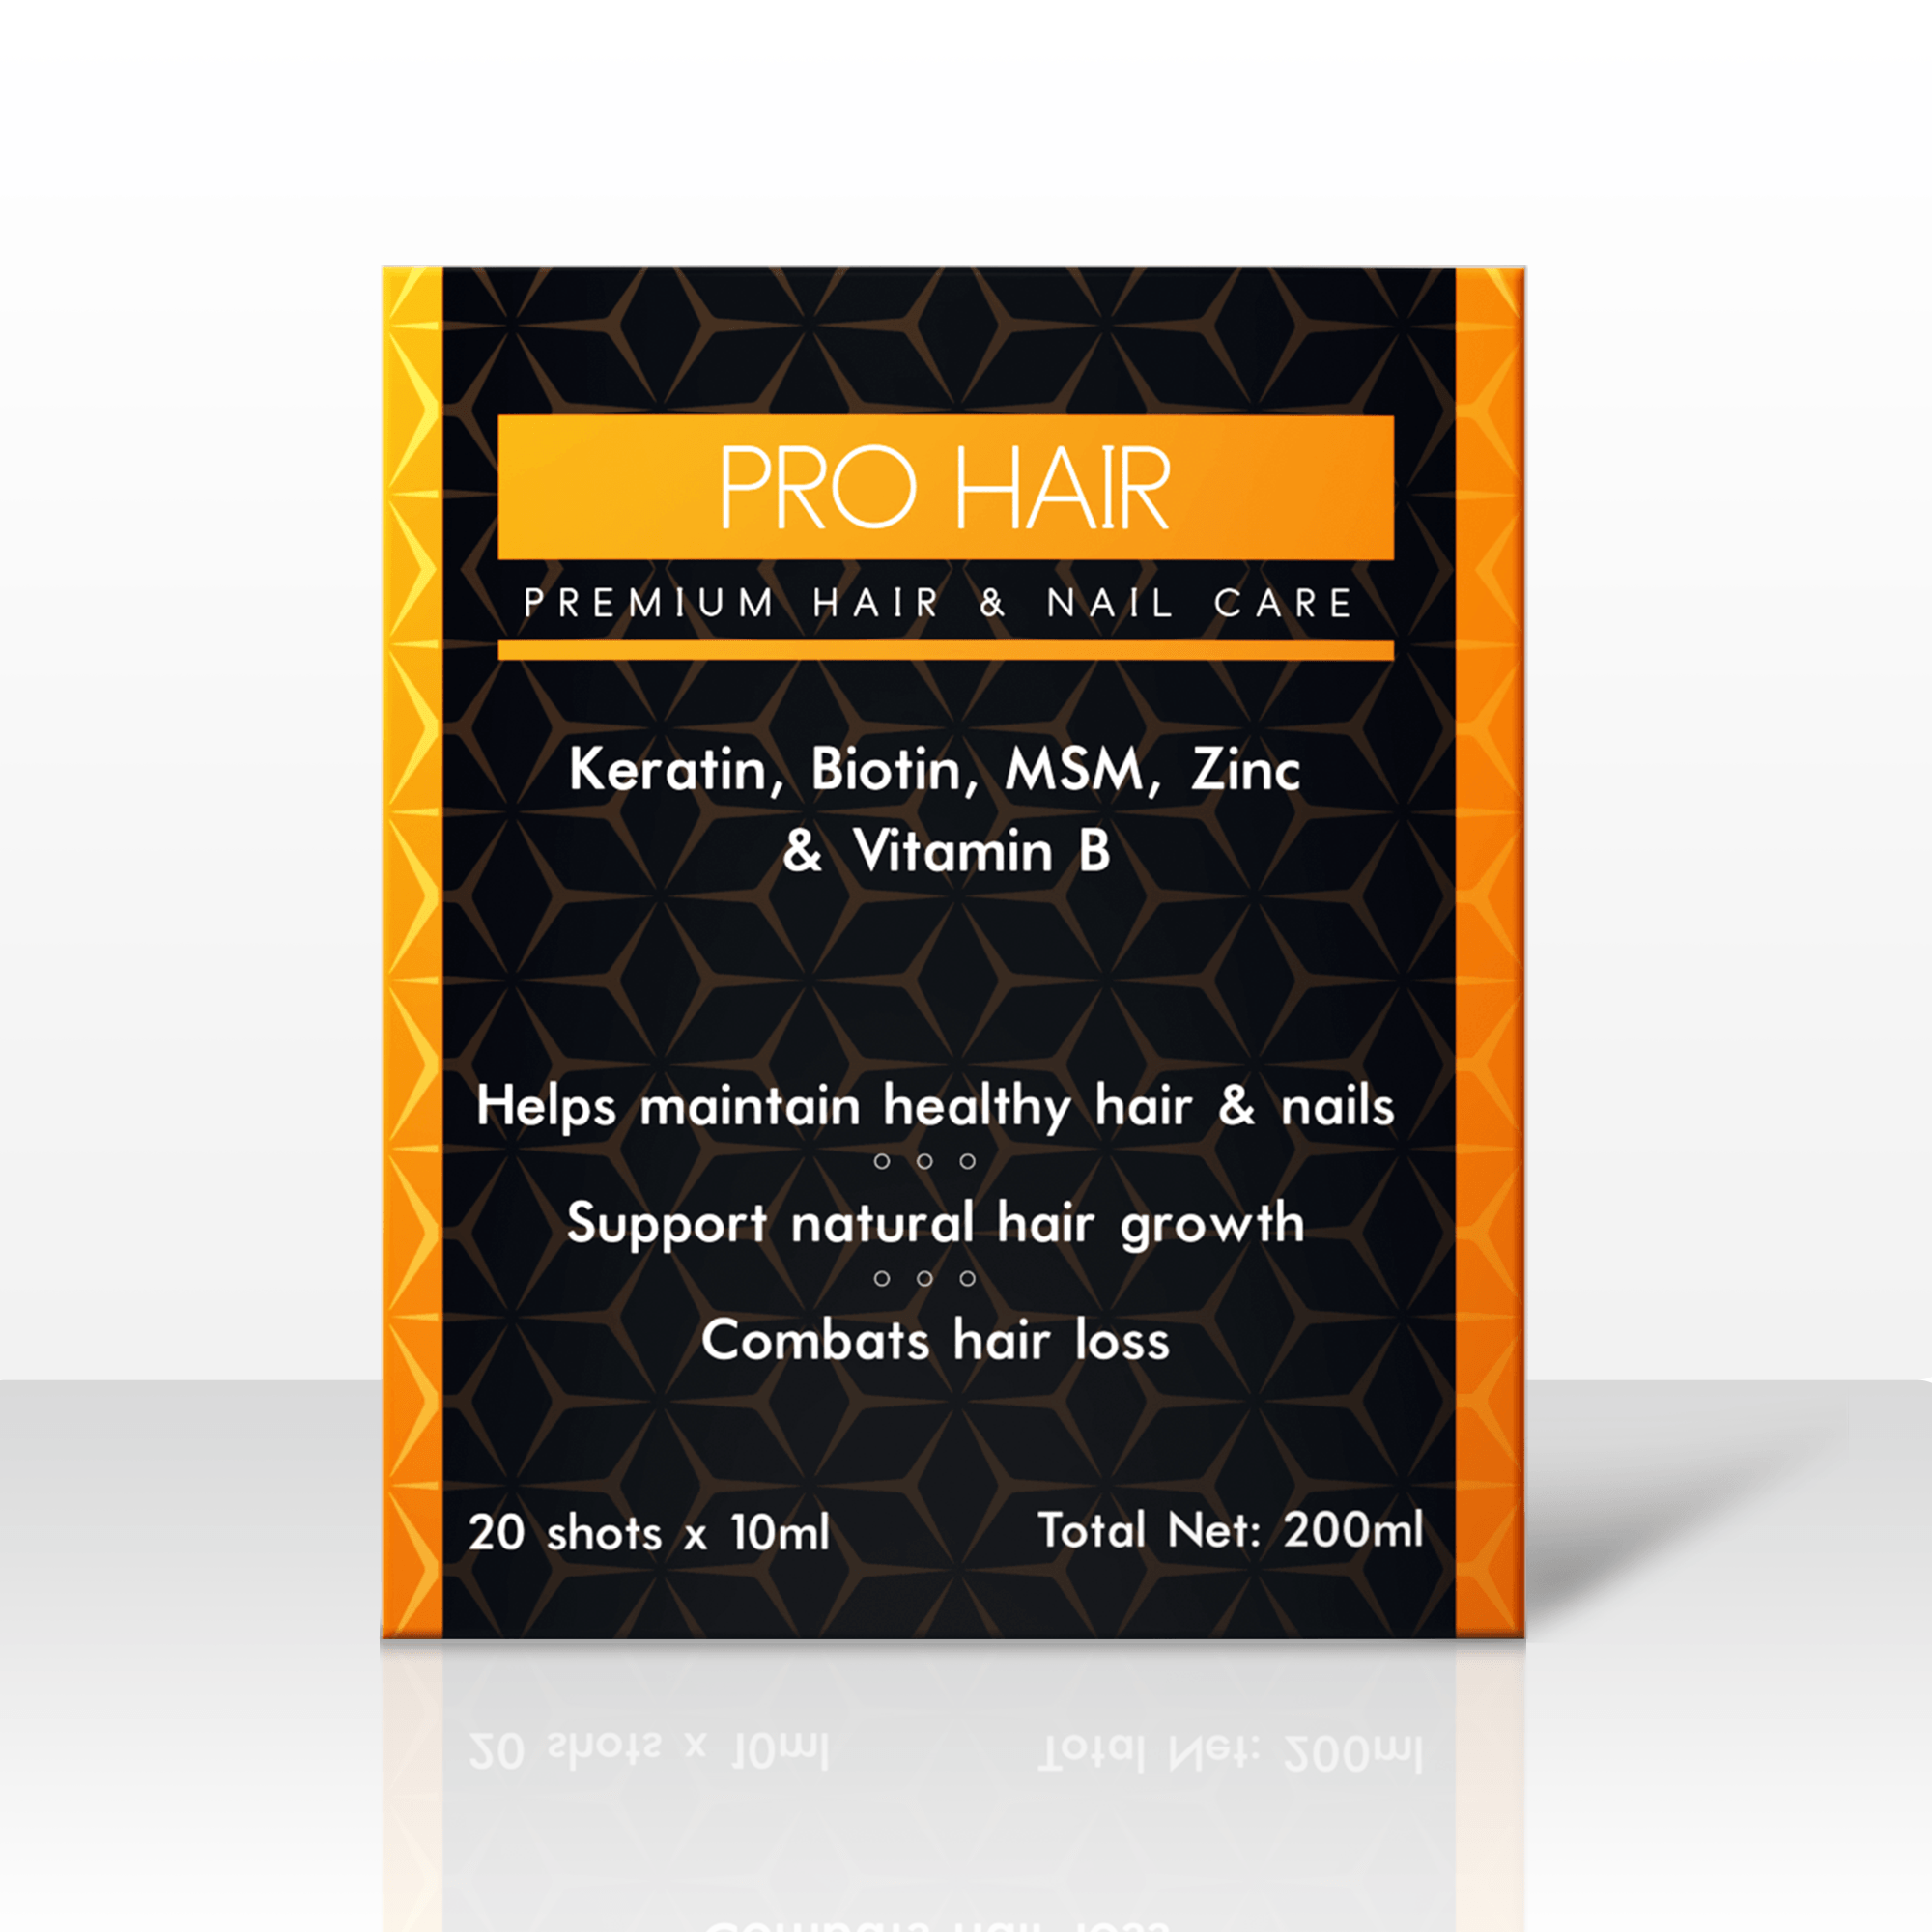 &lt;img src=&quot;pic.gif&quot; alt=&quot;Hair Growth Skin Nail Energy Supplement for African Women and Men&quot; /&gt;